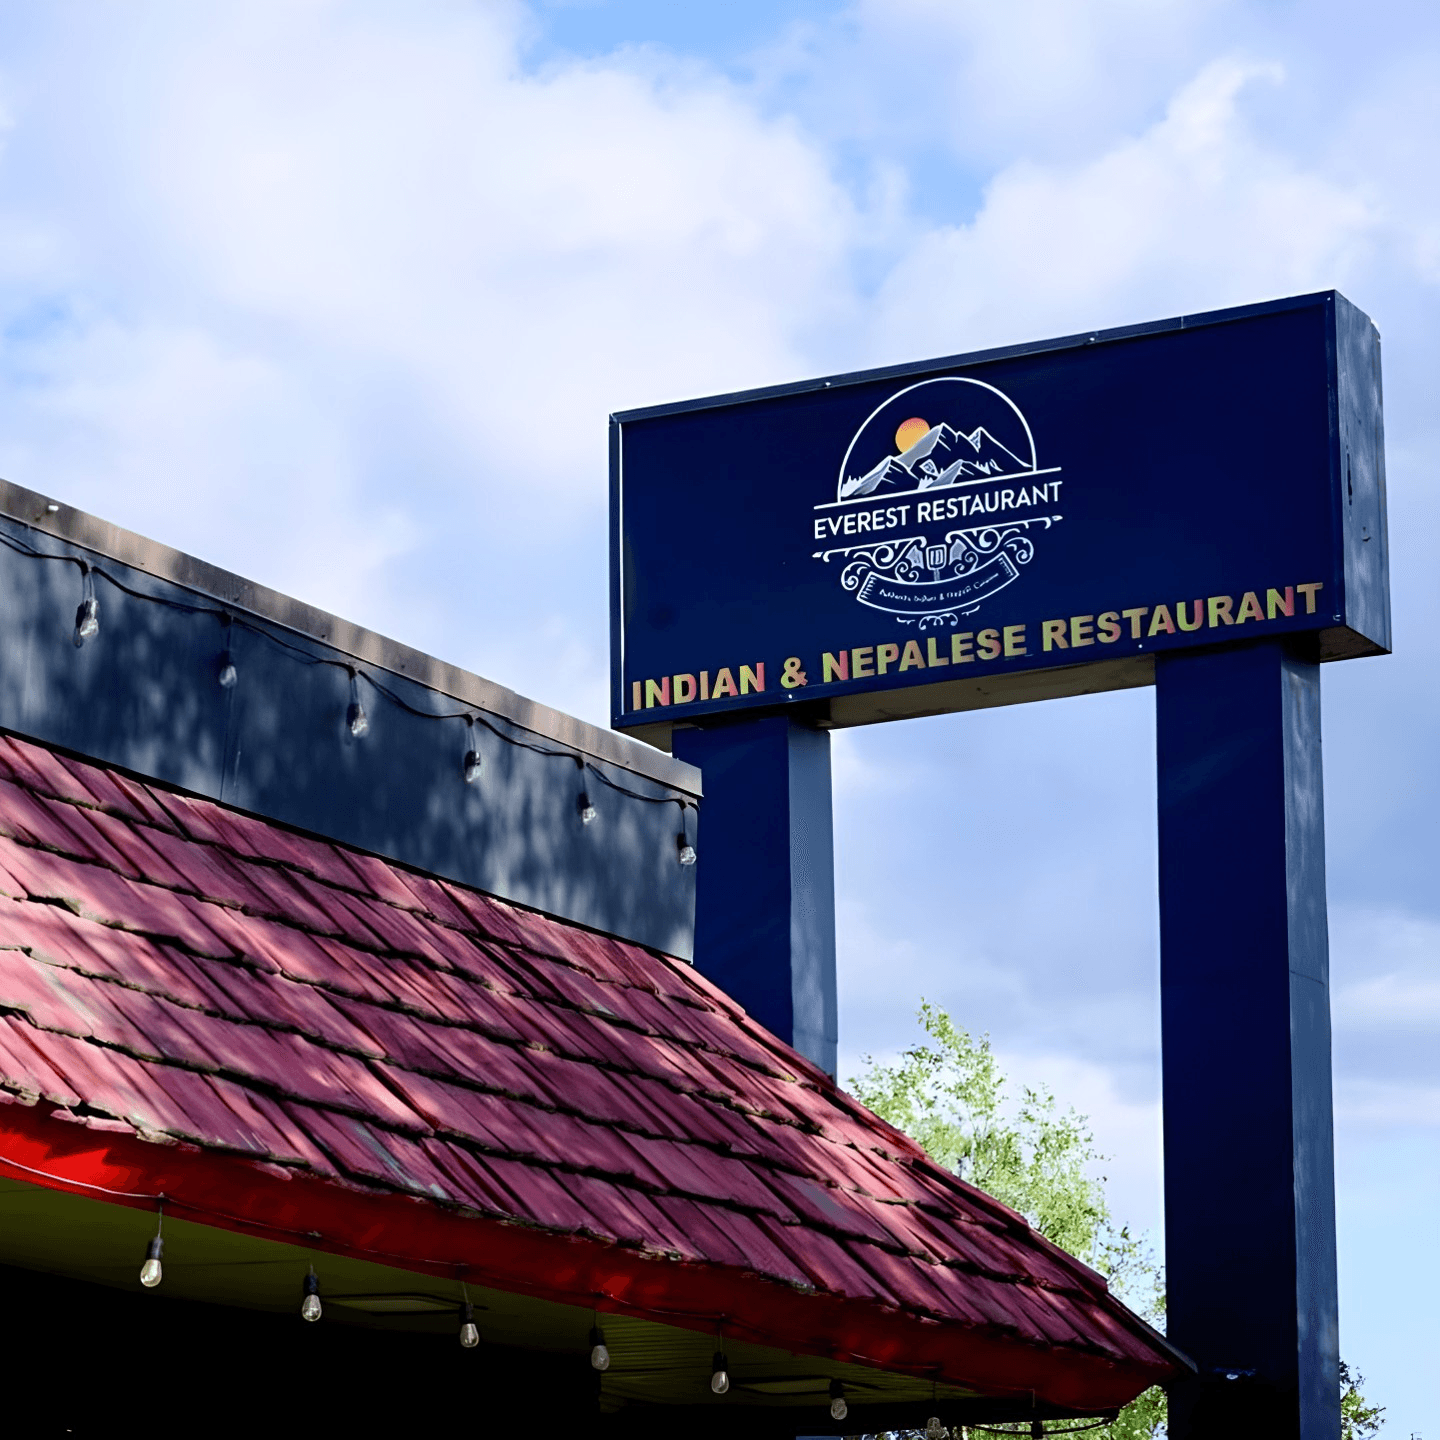 WELCOME TO EVEREST RESTAURANT